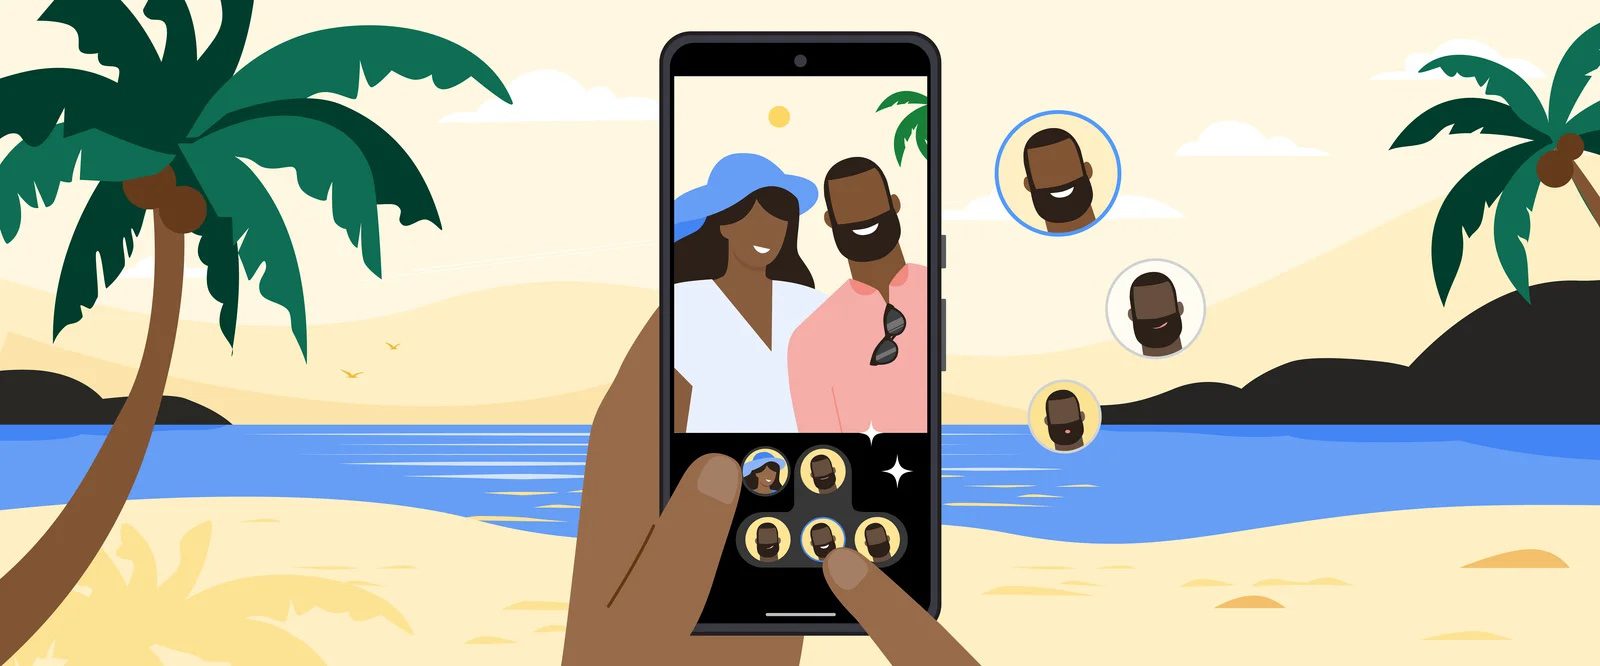 6 AI tools to help you celebrate valentine's day the African way